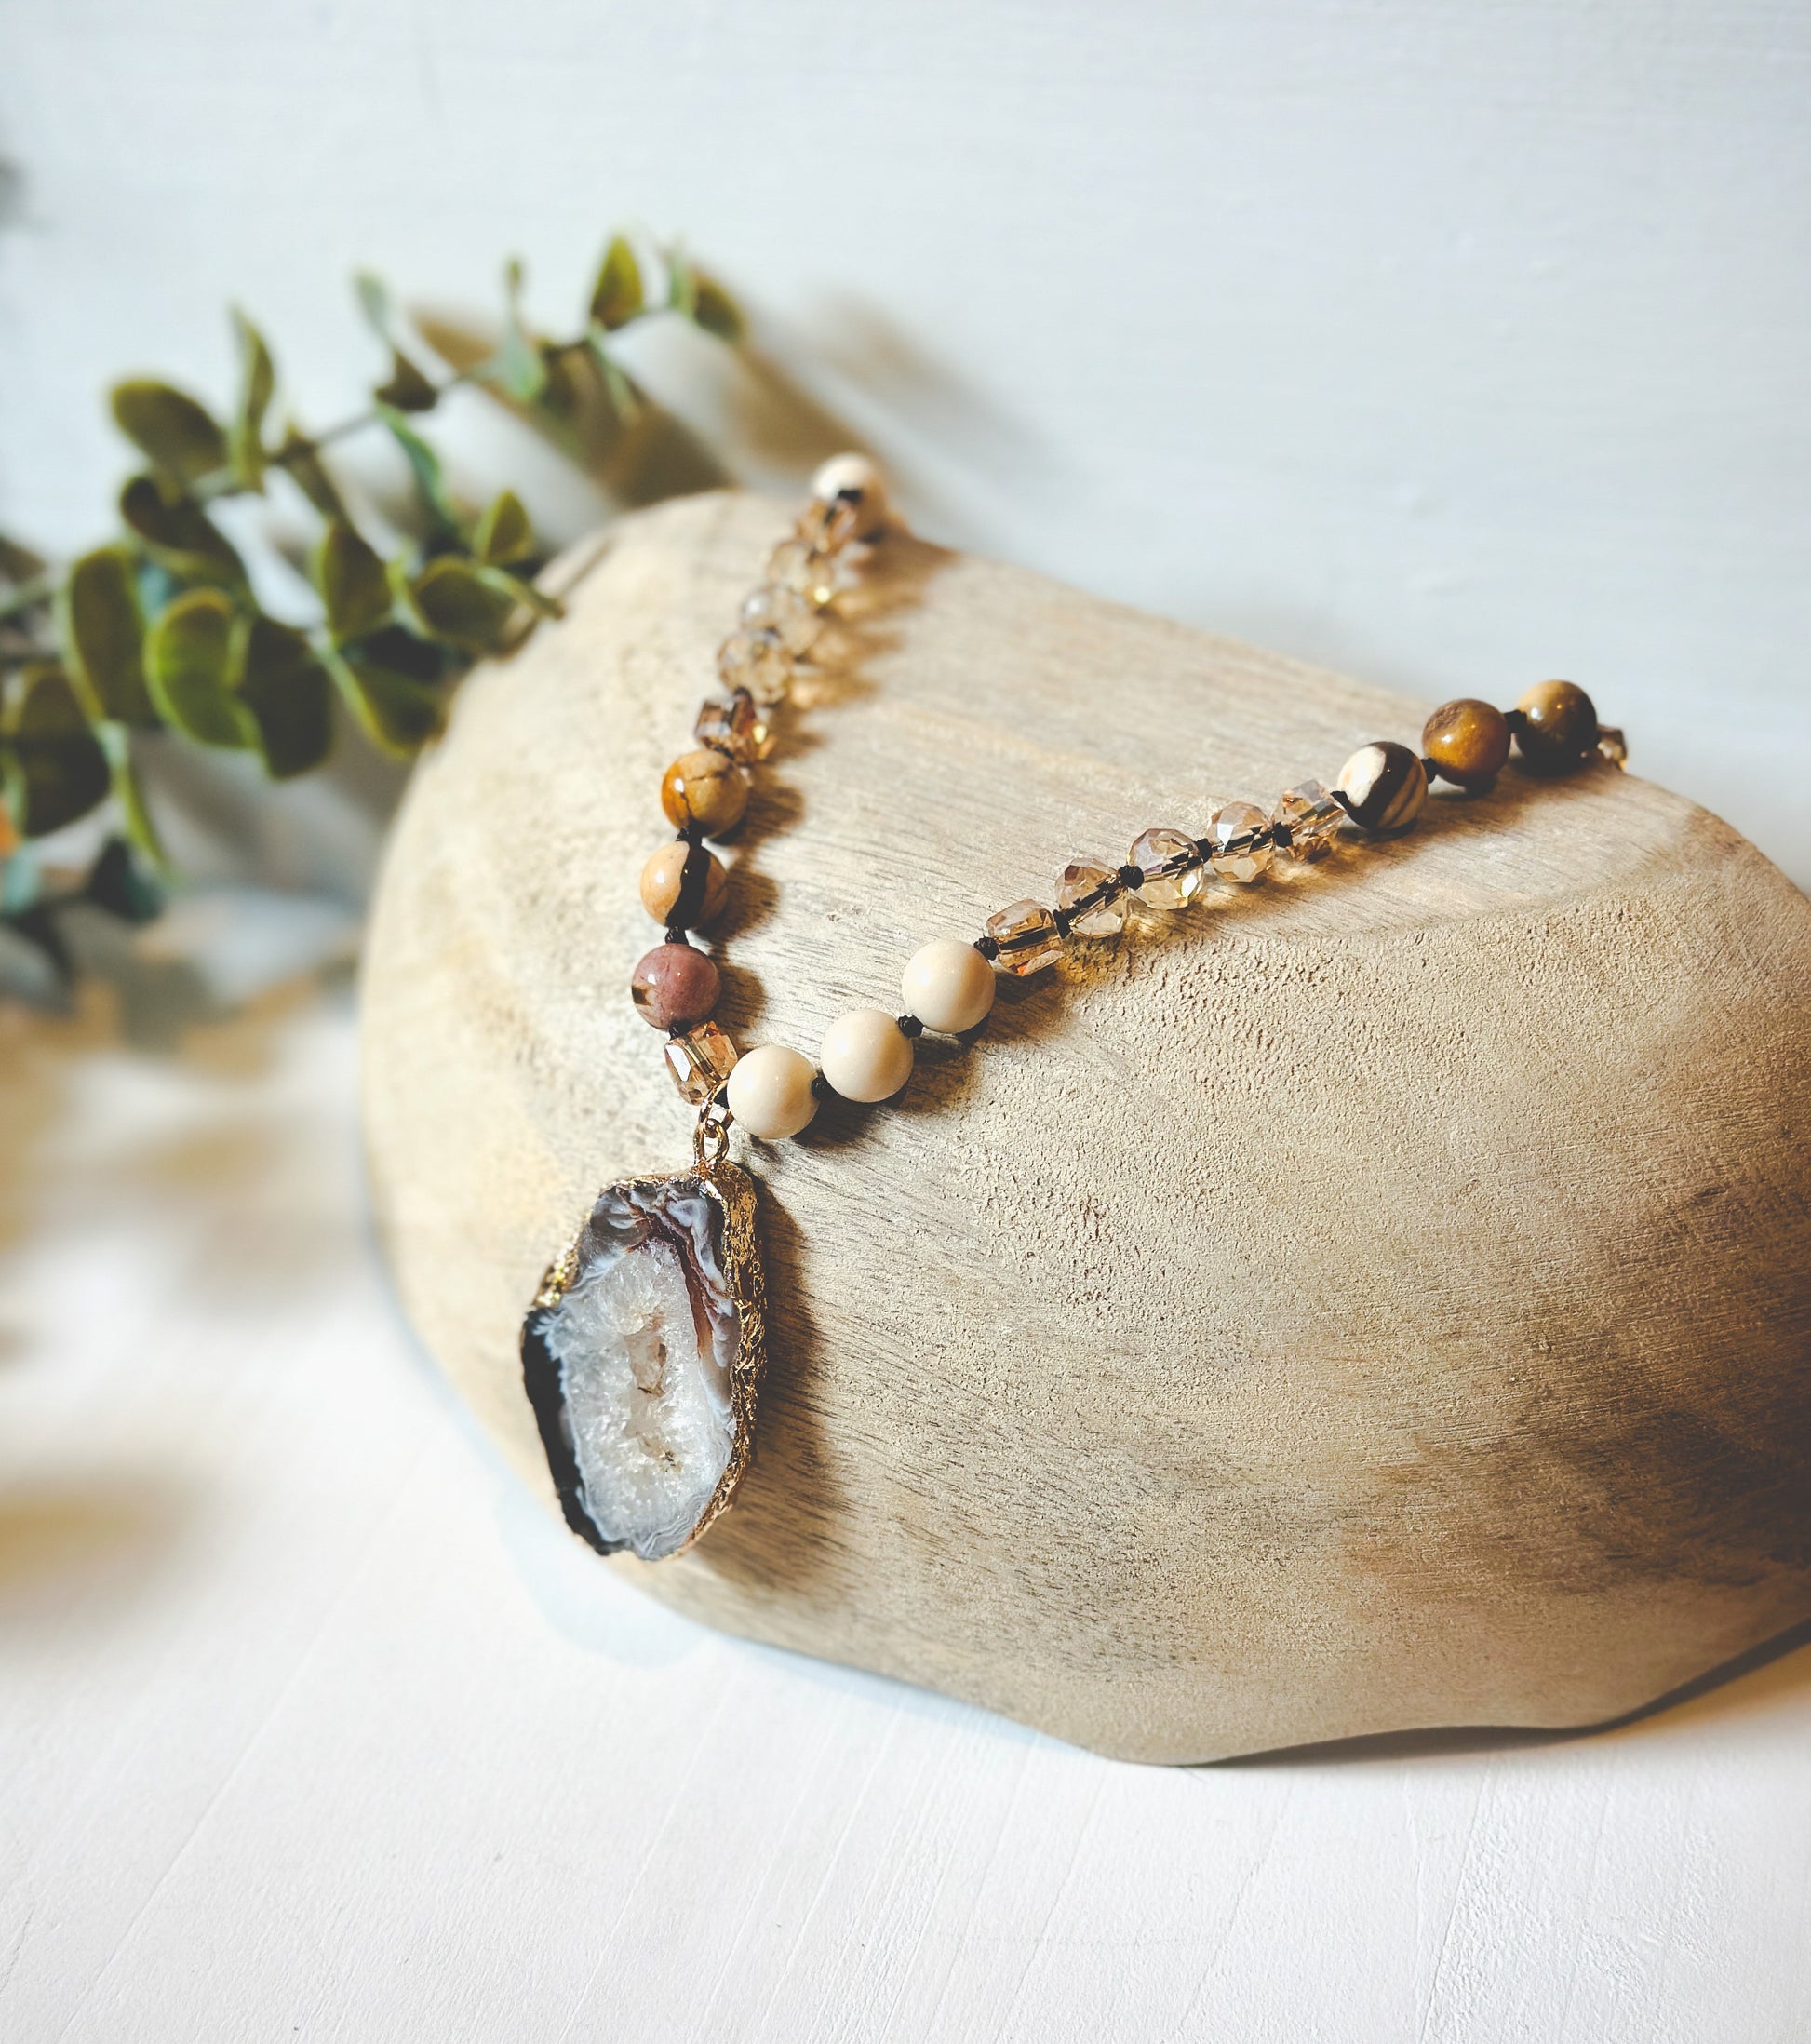 Gemstone necklace with a druzy agate pendant